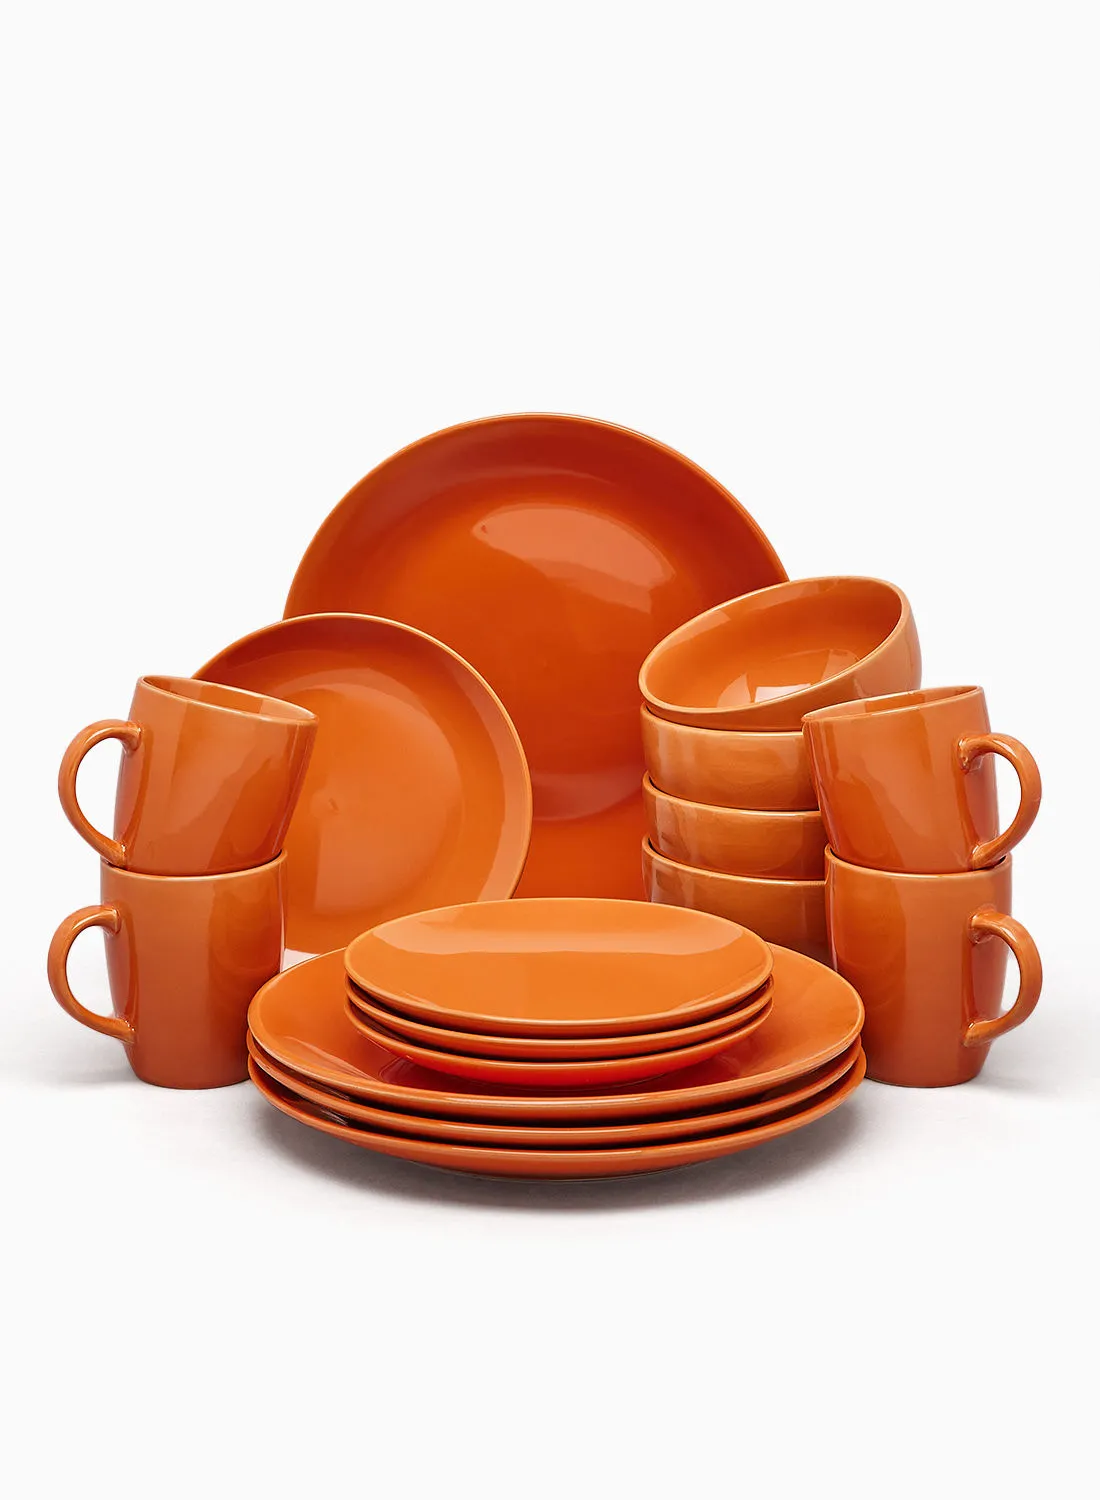 noon east 16 Piece Stoneware Dinner Set - Dishes, Plates - Dinner Plate, Side Plate, Bowl, Mugs - Serves 4 - Rust